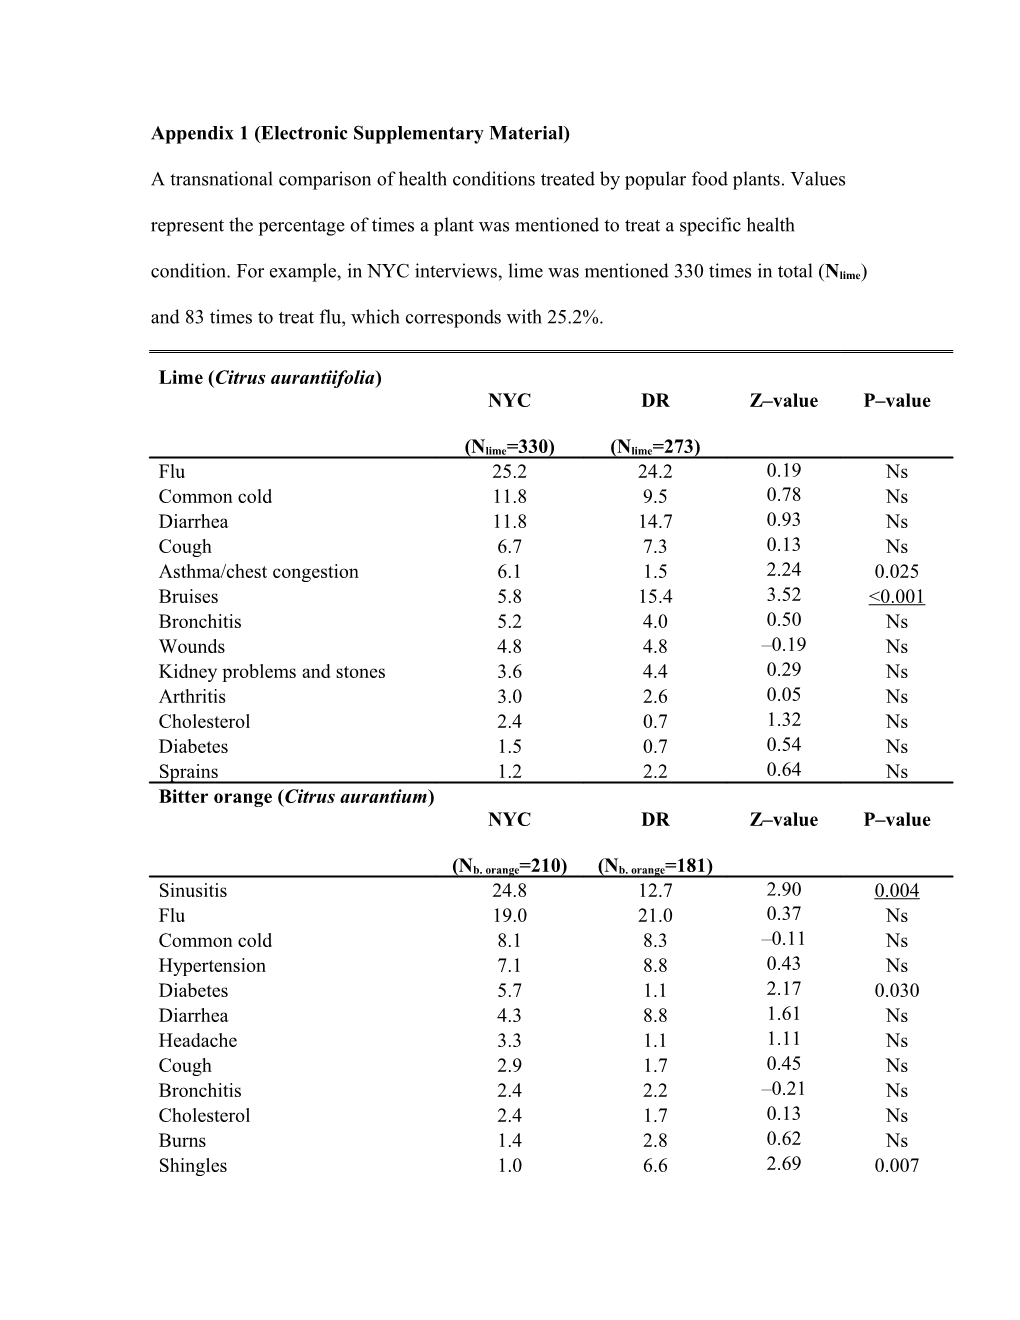 Table 3: a Transnational Comparison of Health Conditions Treated by Popular Food Plants